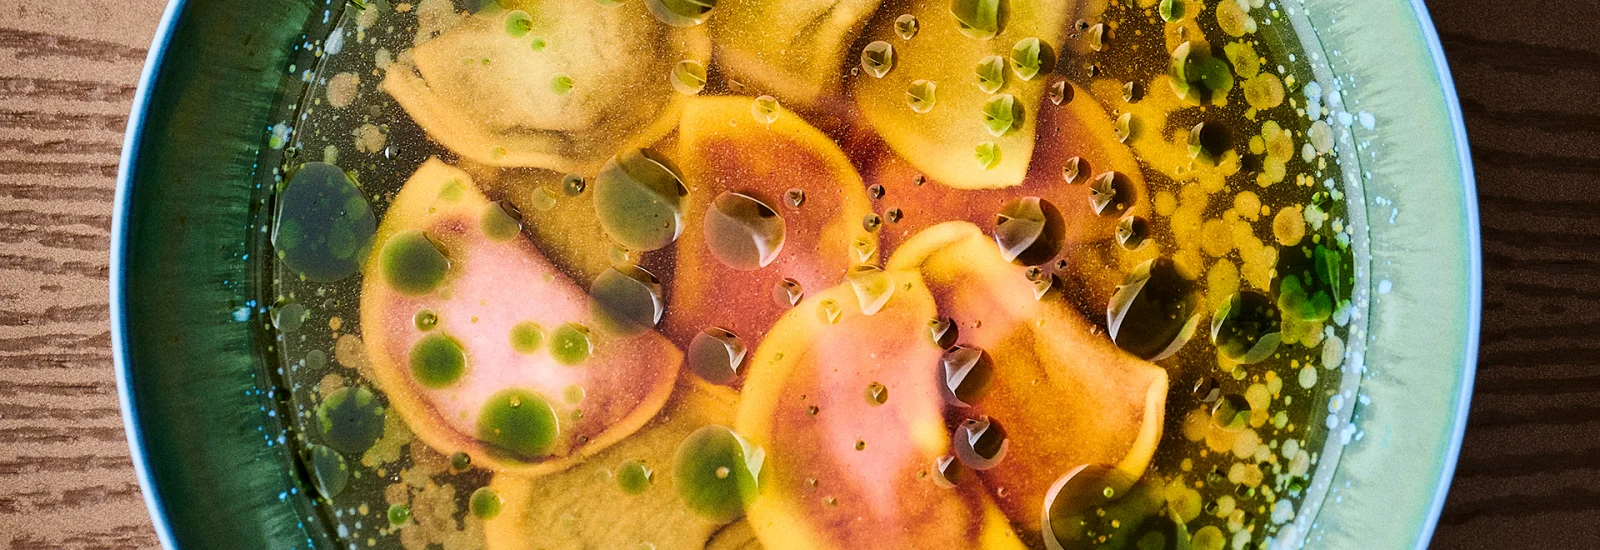 Ravioli in a green bowl on a wooden table, photographed from above